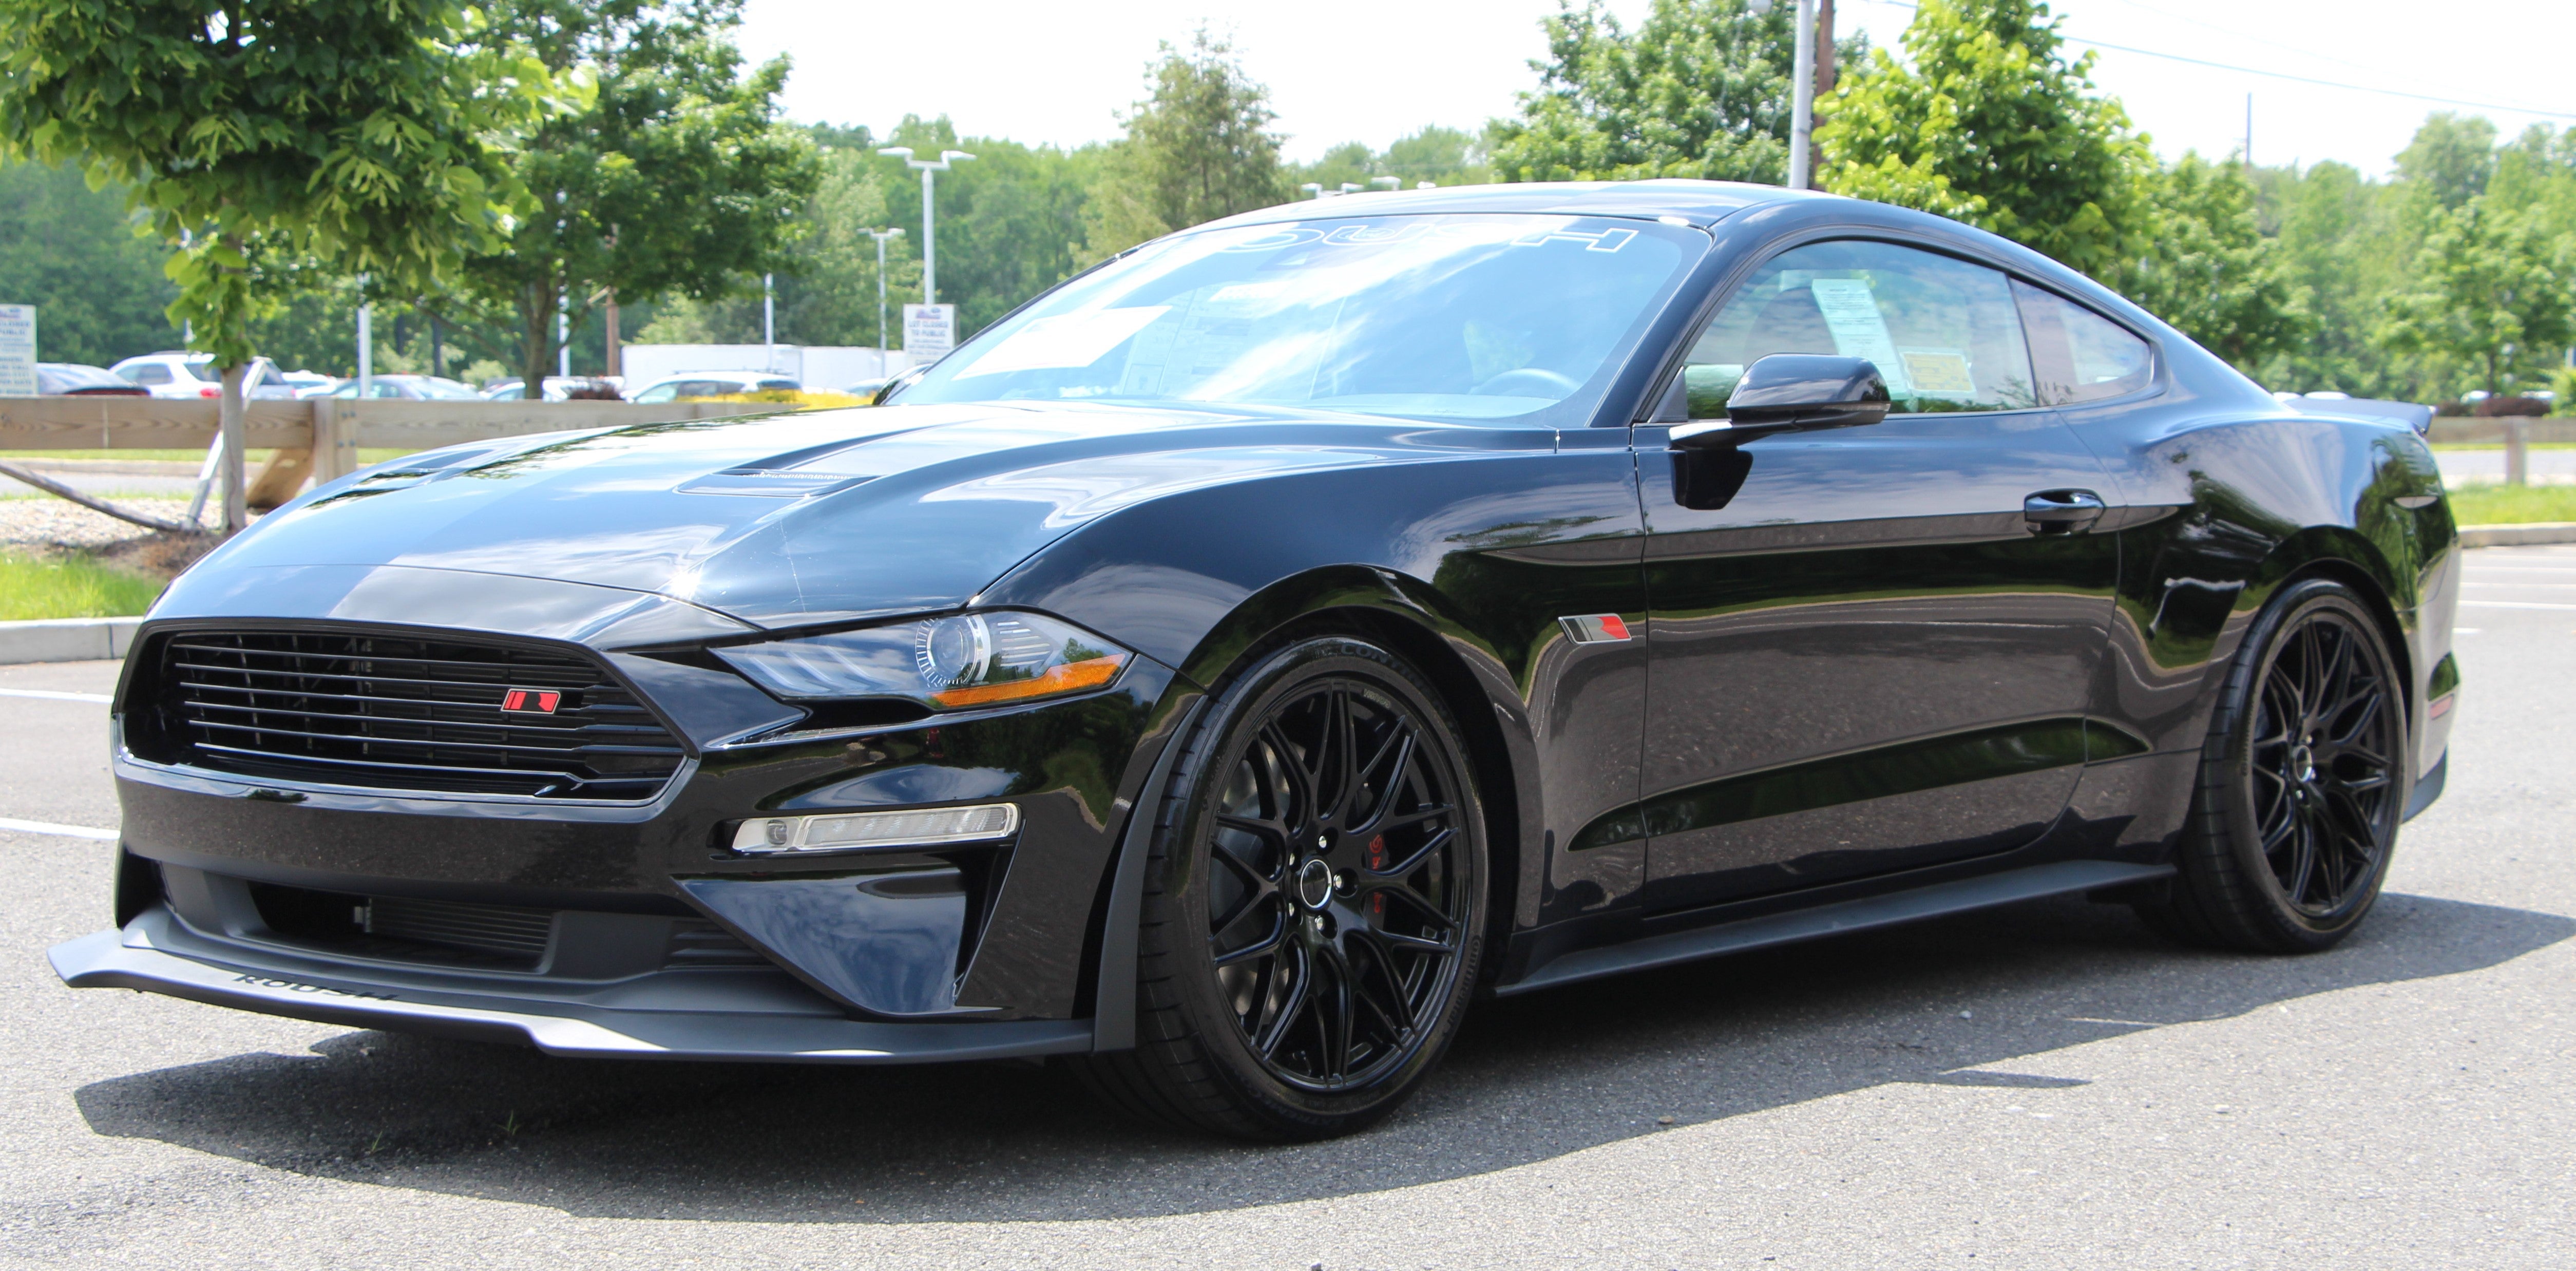 ROUSH 450R Mustang at All American Ford in Old Bridge in Old Bridge STATE#